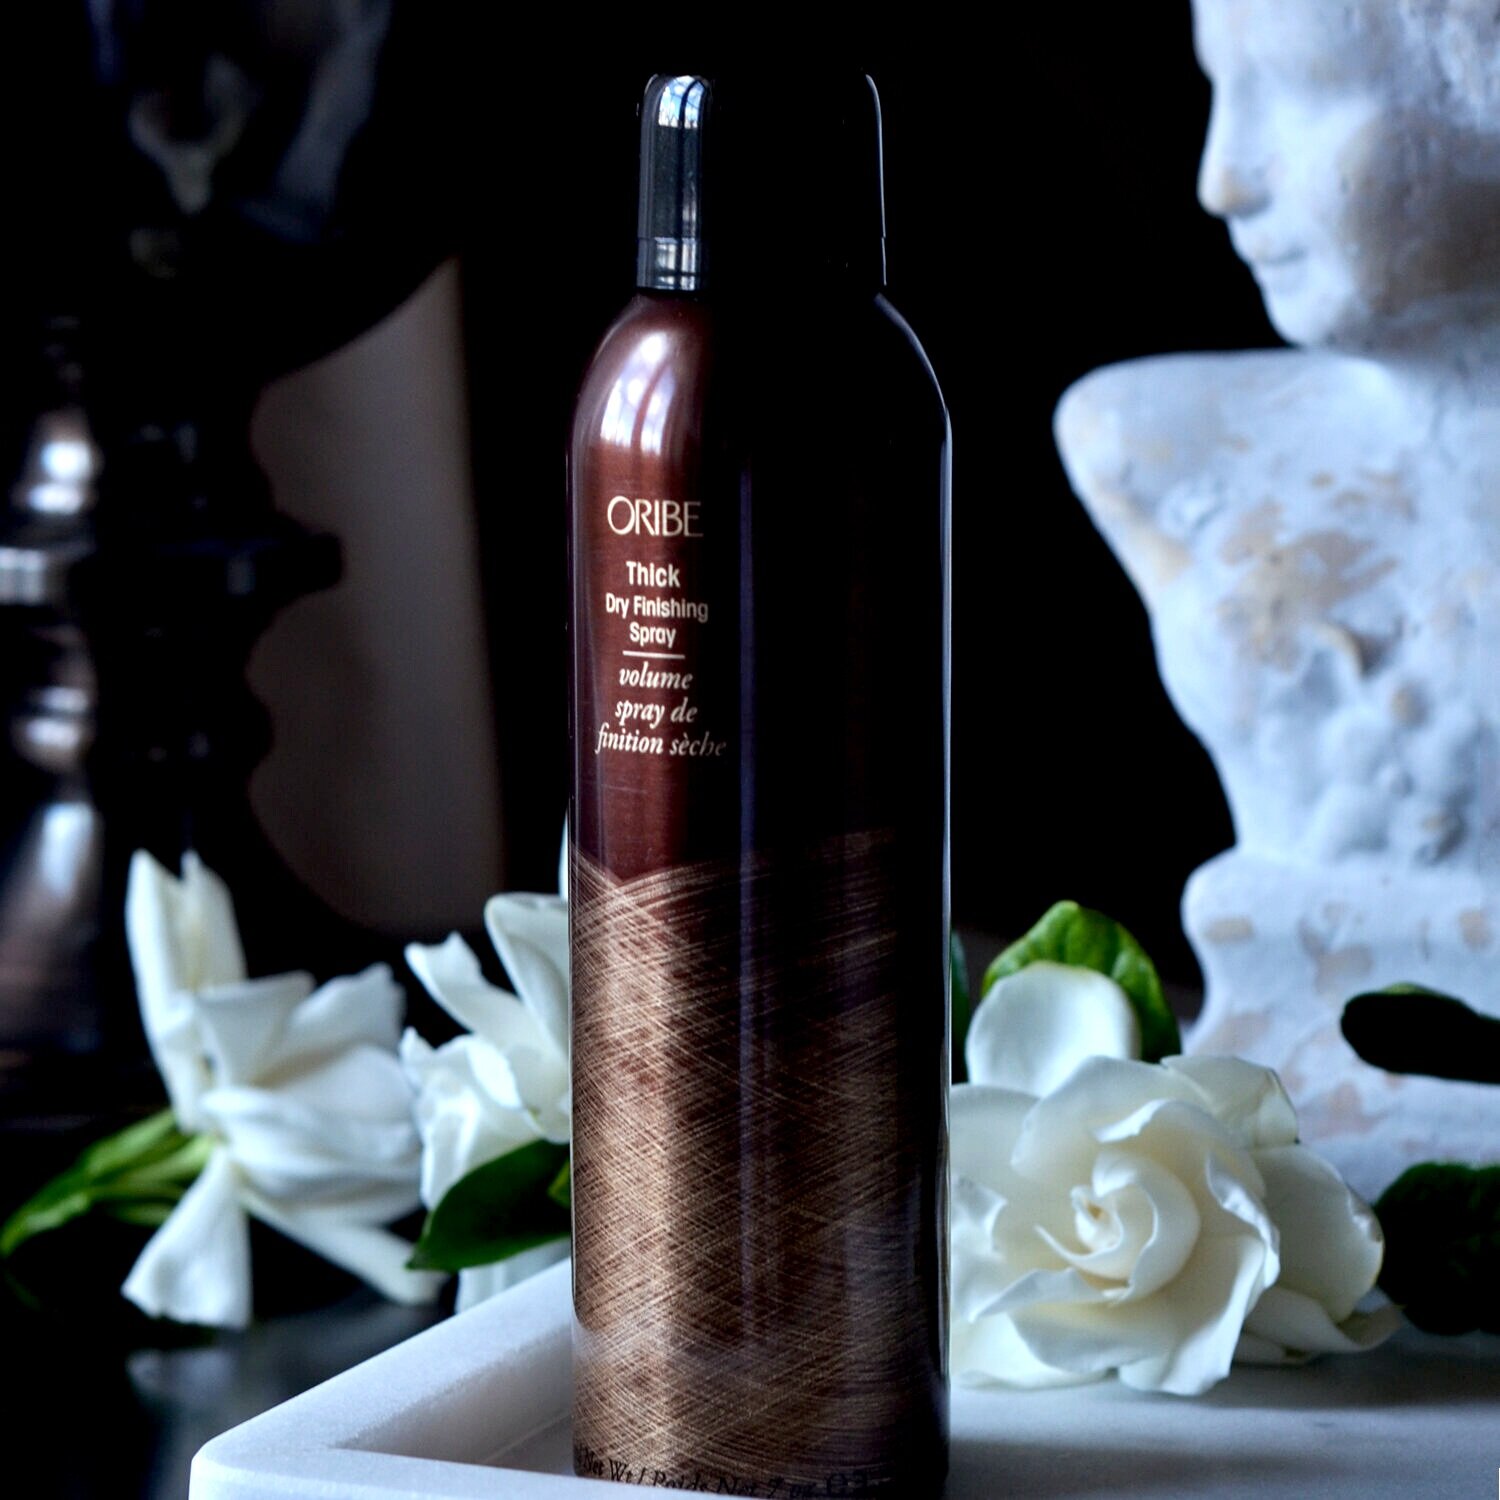 3. Oribe Thick Dry Finishing spray will plump up the volume of your hair. This high-density finishing spray inflates each strand for extra thickness and lushness. This product is your best-kept secret for hair that is big, beautiful, beyond luxurious.